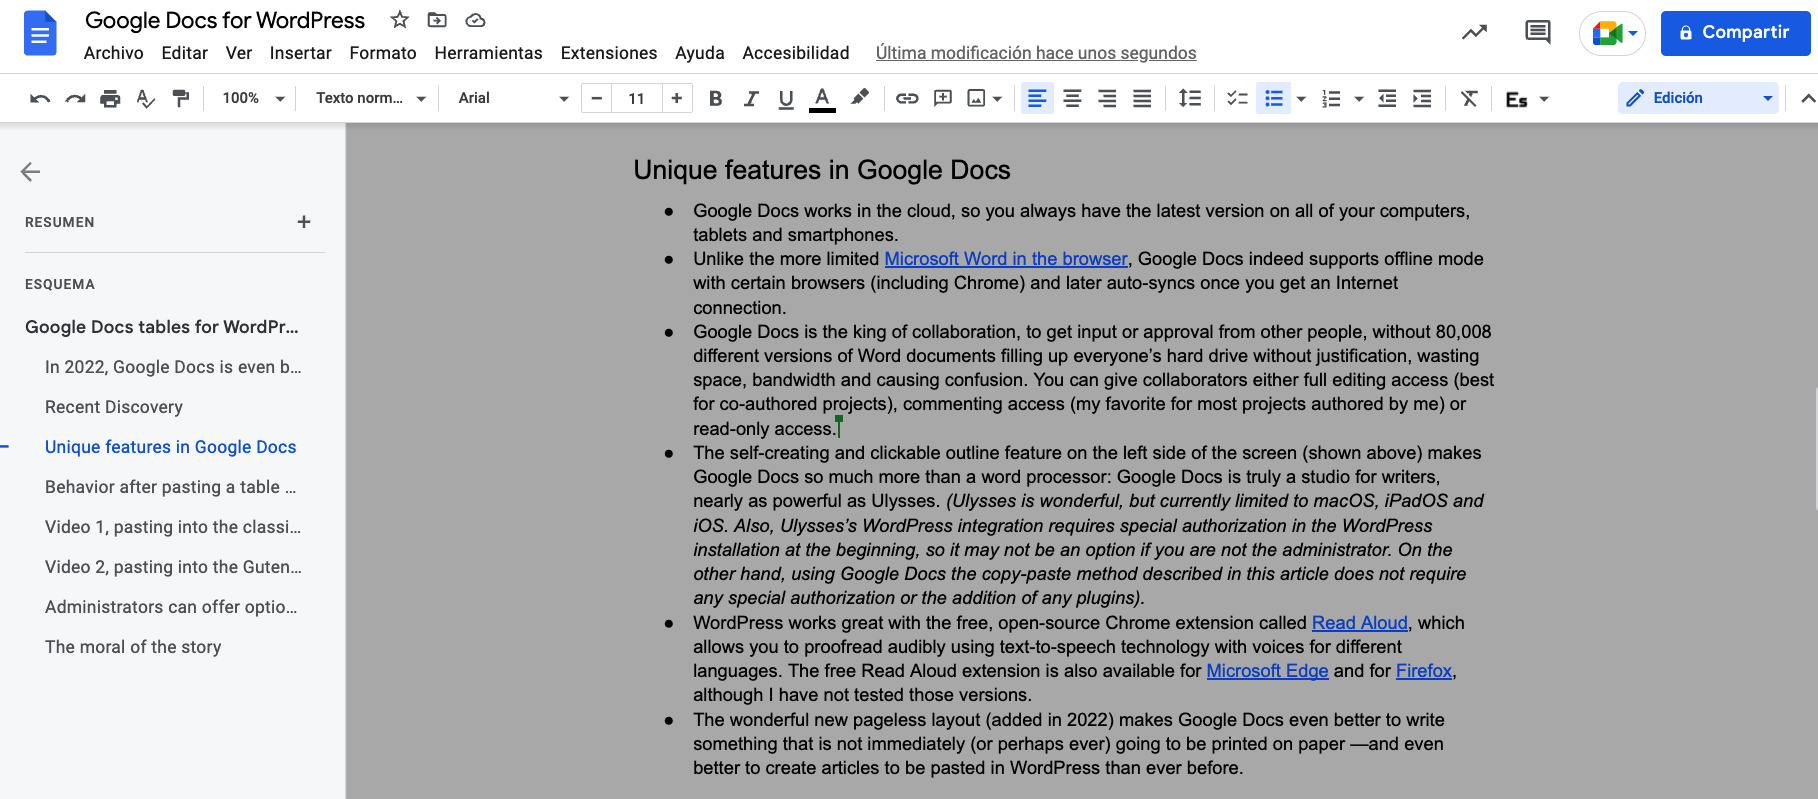 Google Docs tables for WordPress (and more) in 2022 9